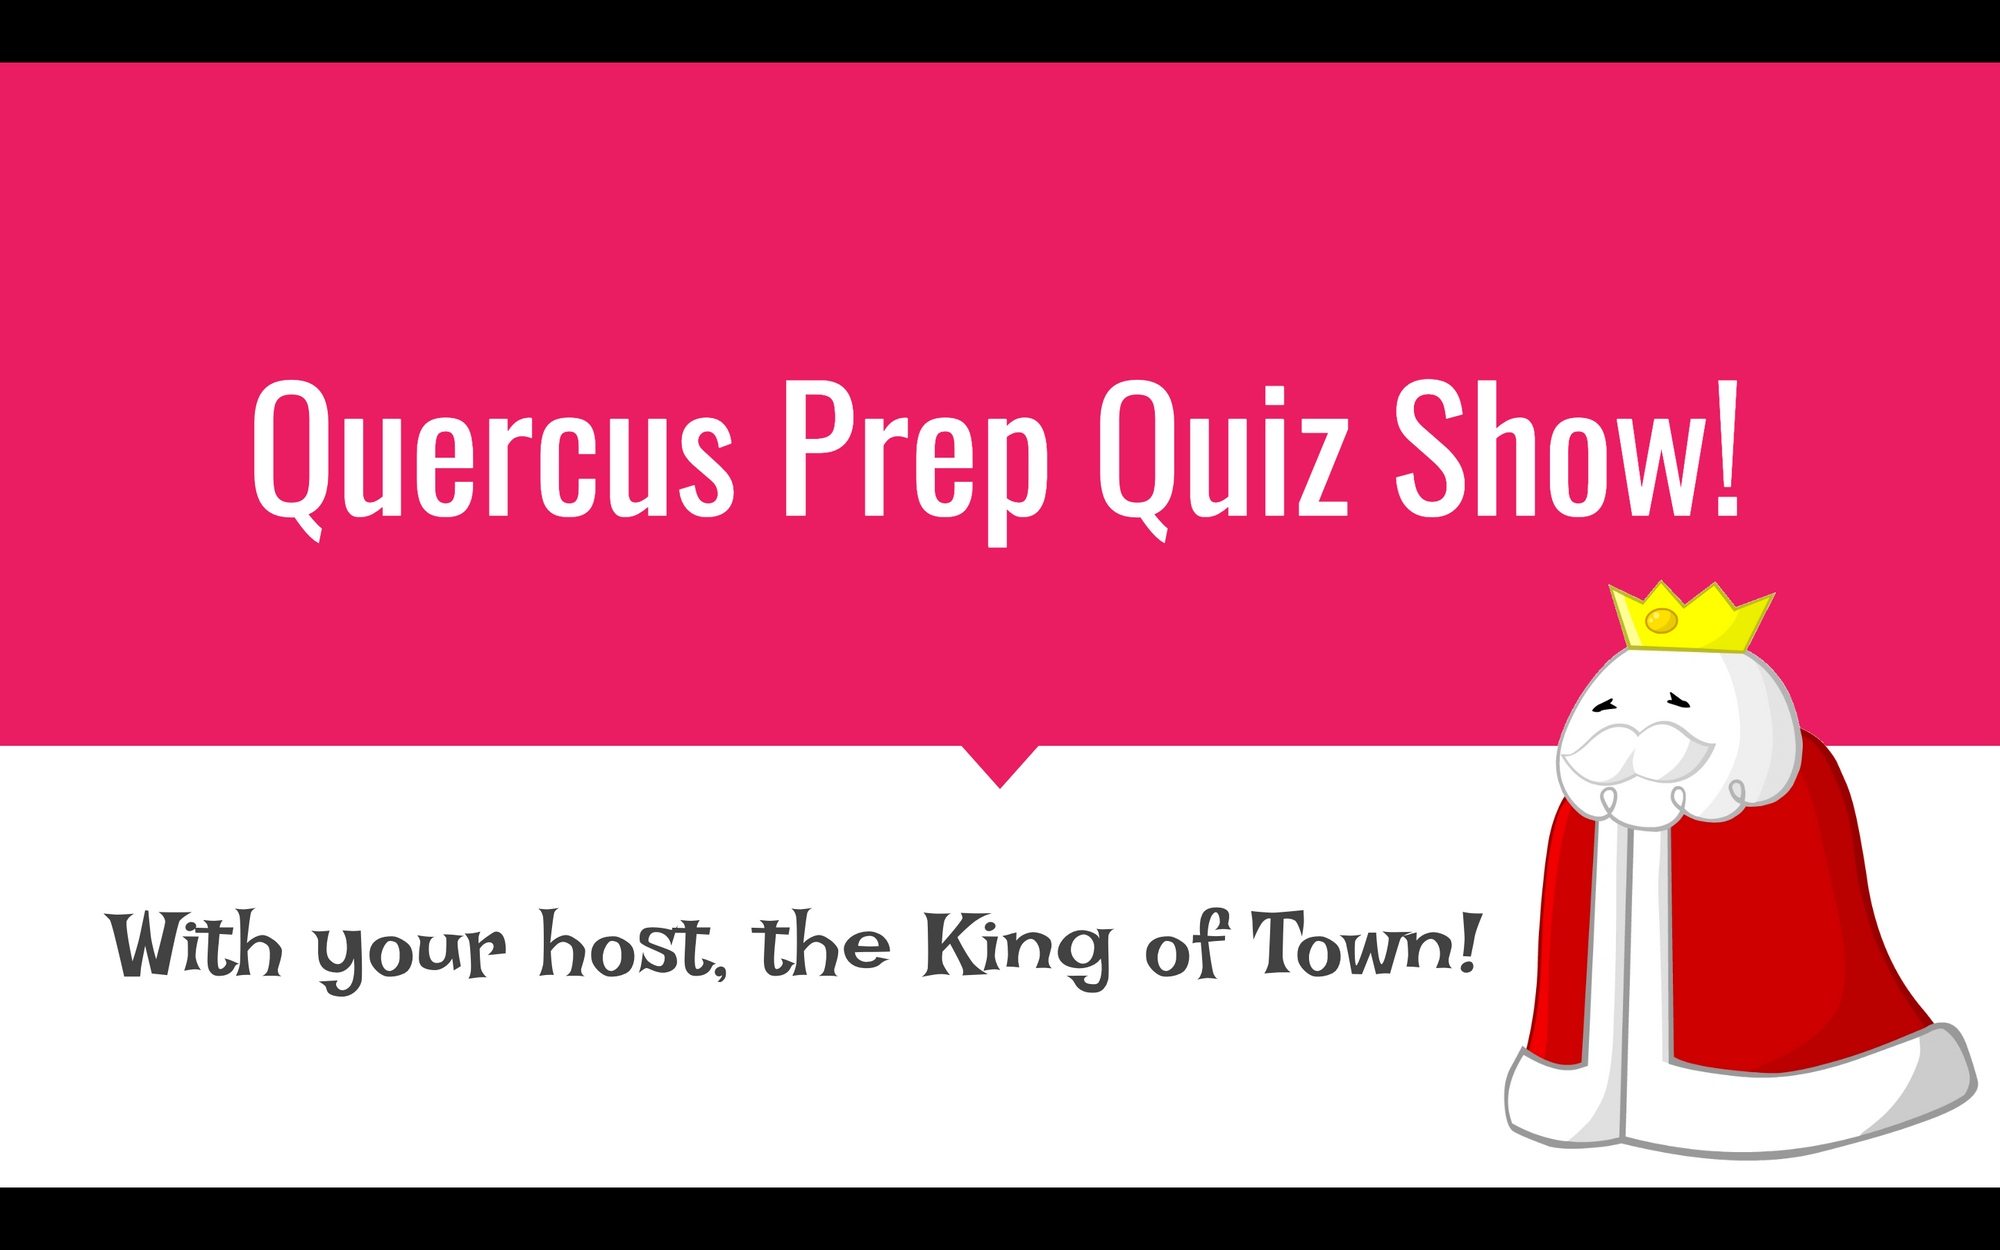 A presentation slide, saying "Quercus Prep Quiz Show! With your host, the King of Town!"